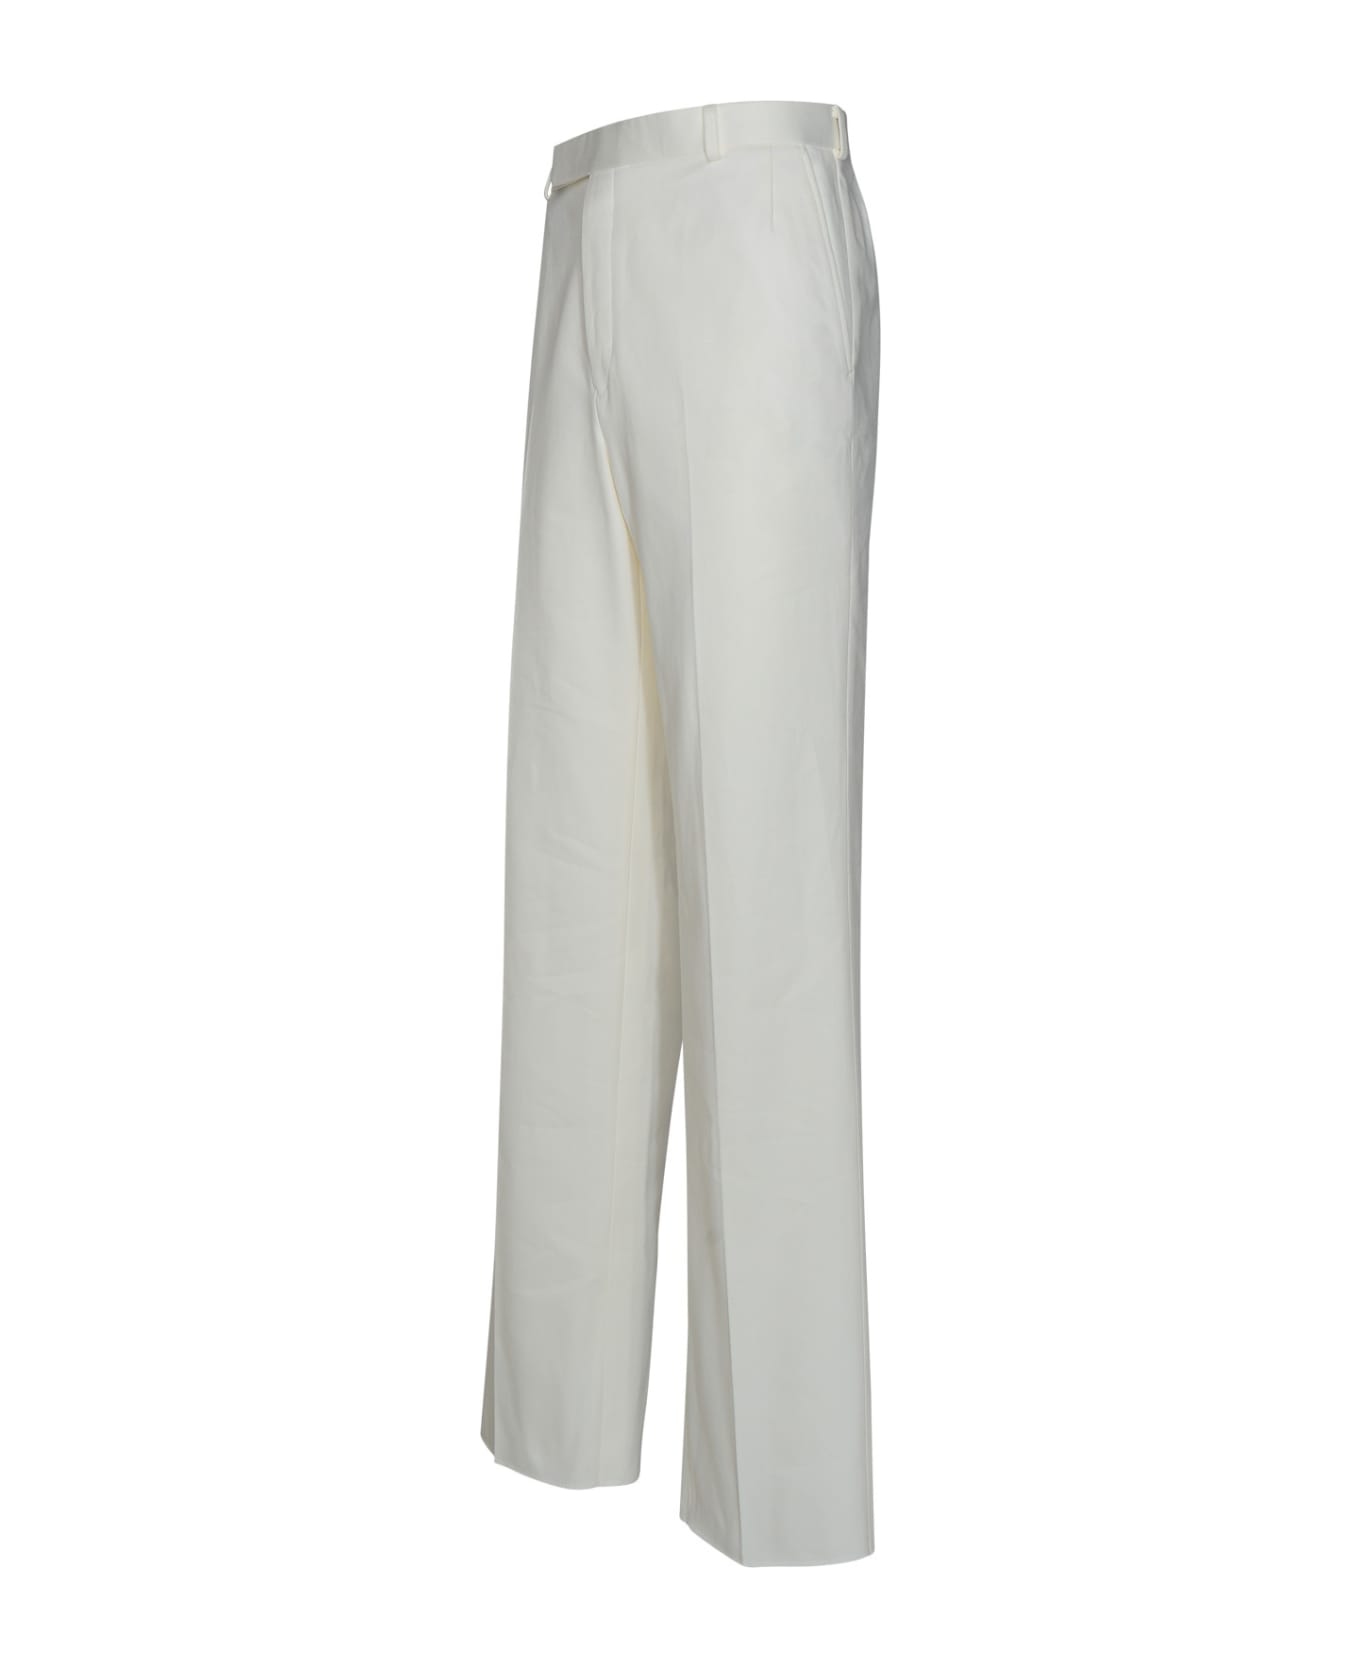 Thom Browne Tailored Trousers In White Cotton - White ボトムス